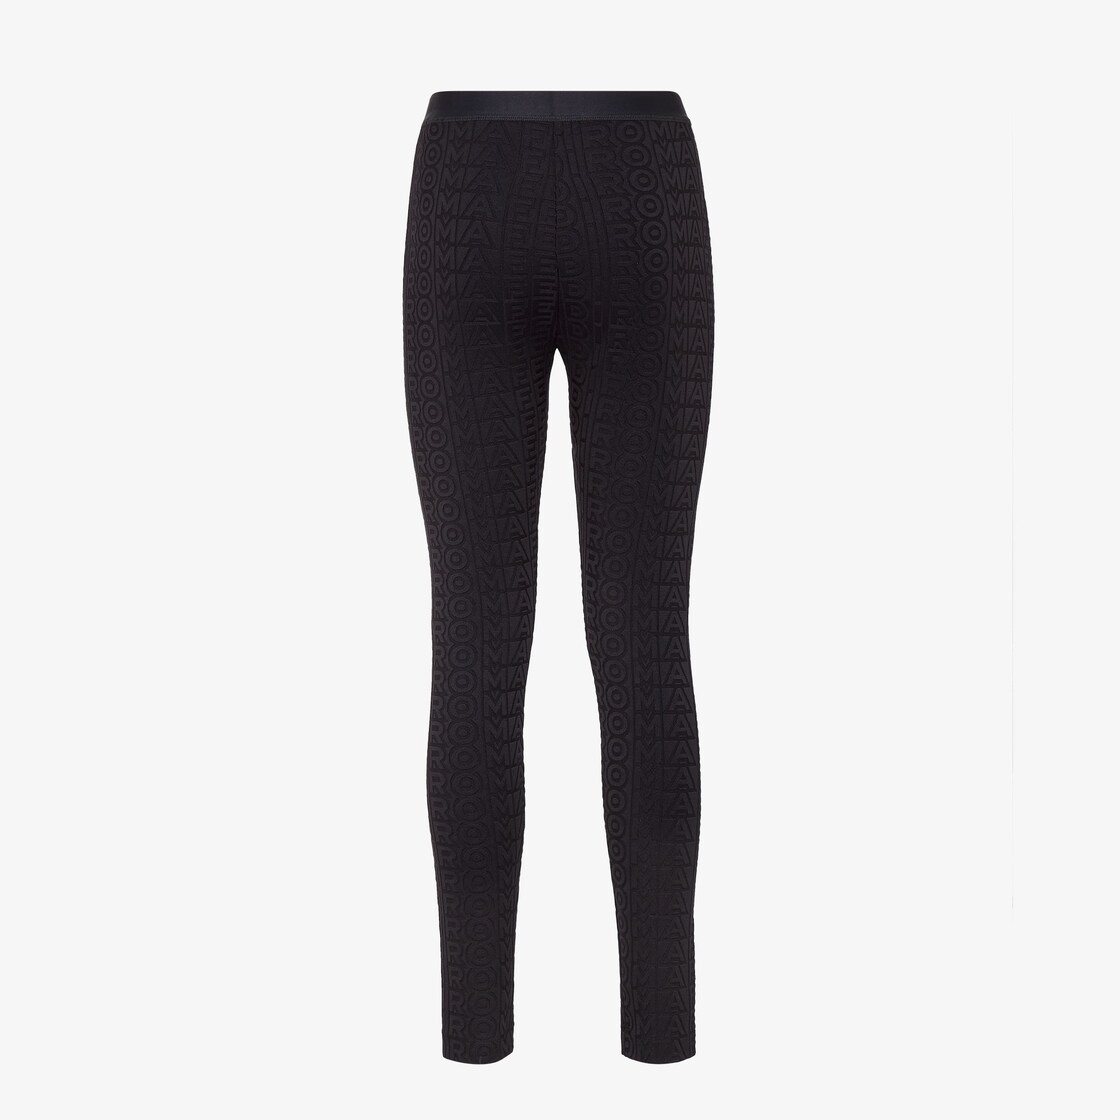 Tight-fitting leggings made of black fabric. The Fendi Roma logo is reinterpreted by Marc Jacobs in  - 2